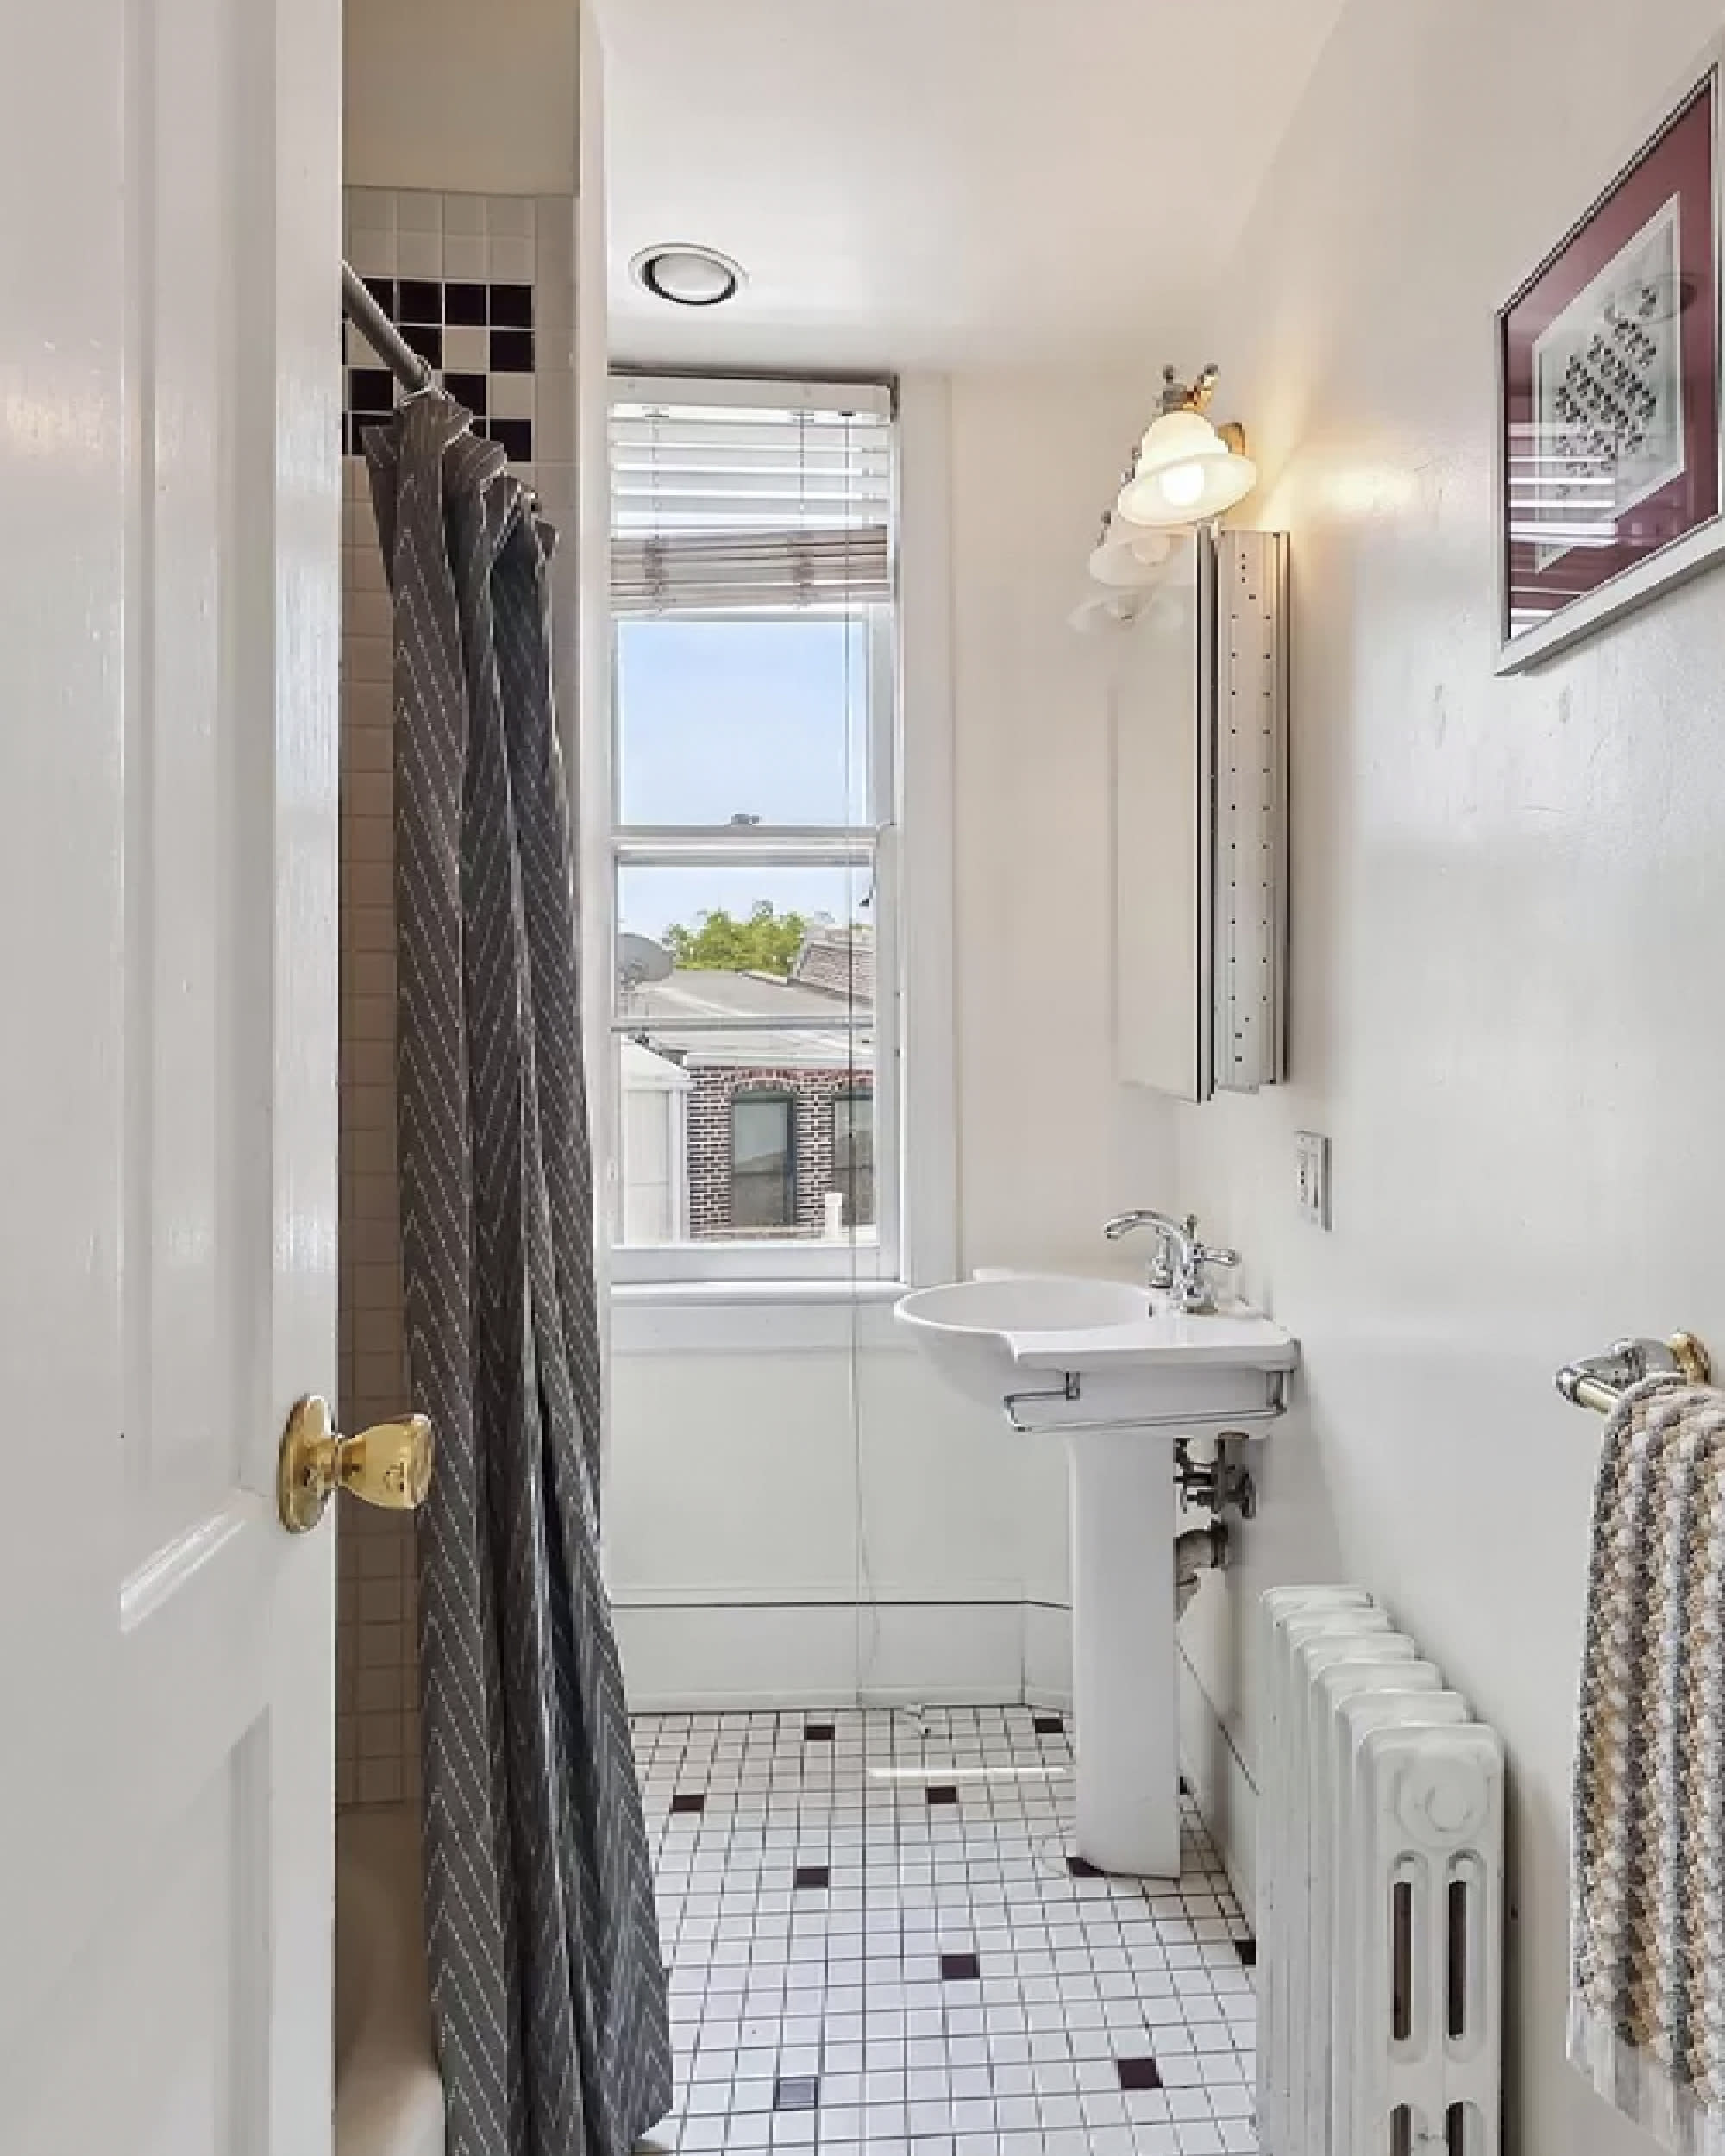 See How I Transformed My Tiny '90s Bathroom to Feel Bigger